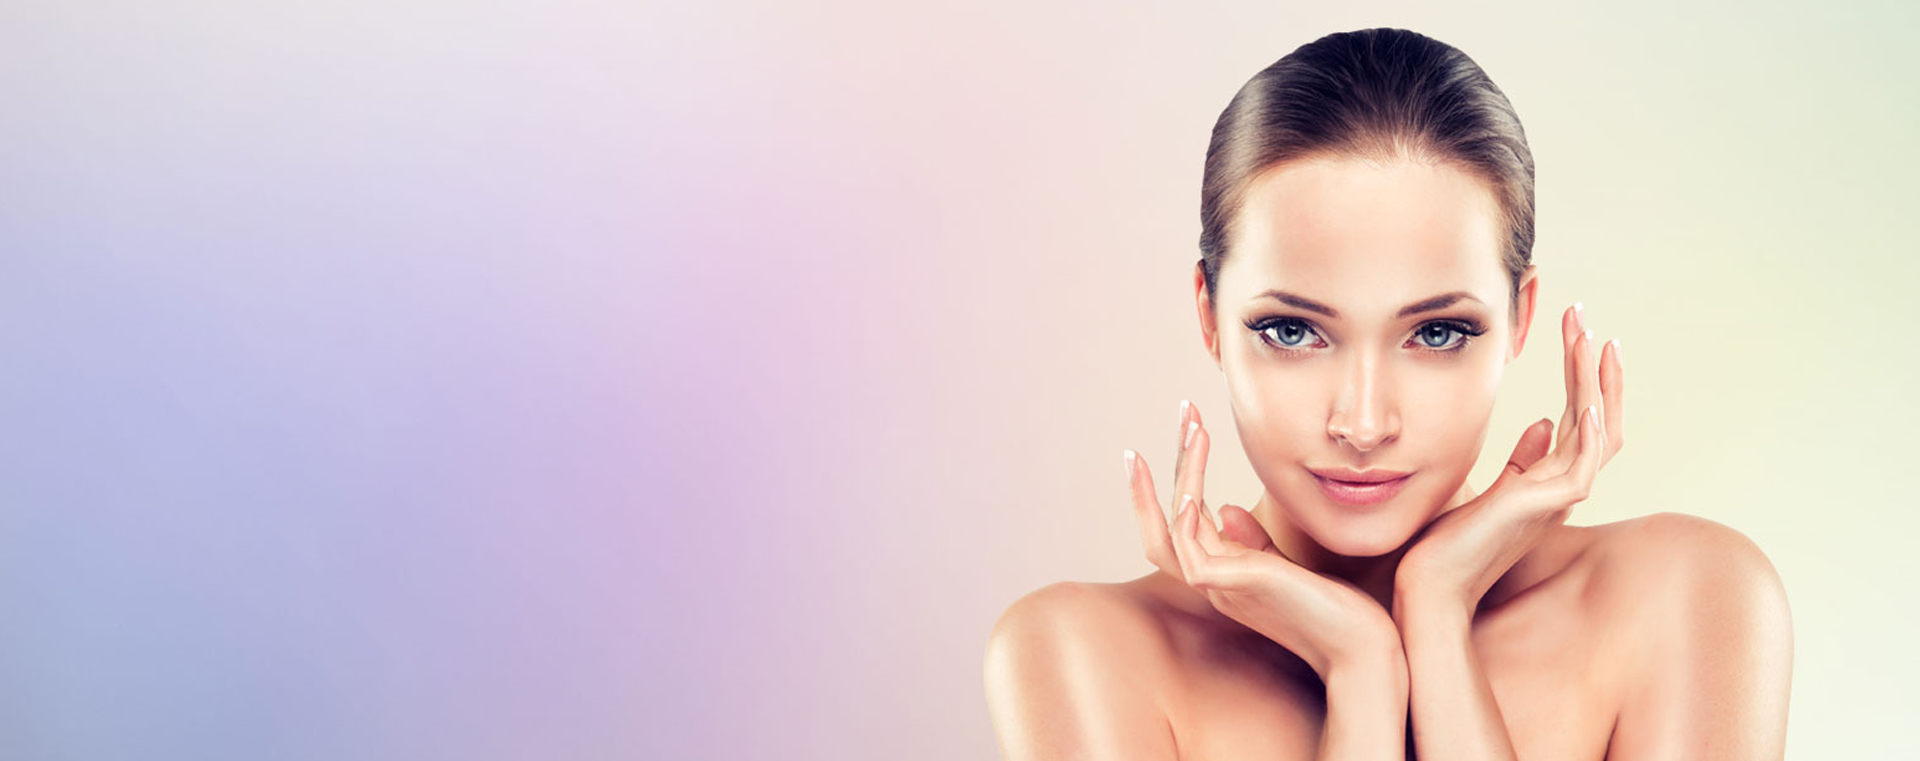 plastic surgery for acne scars